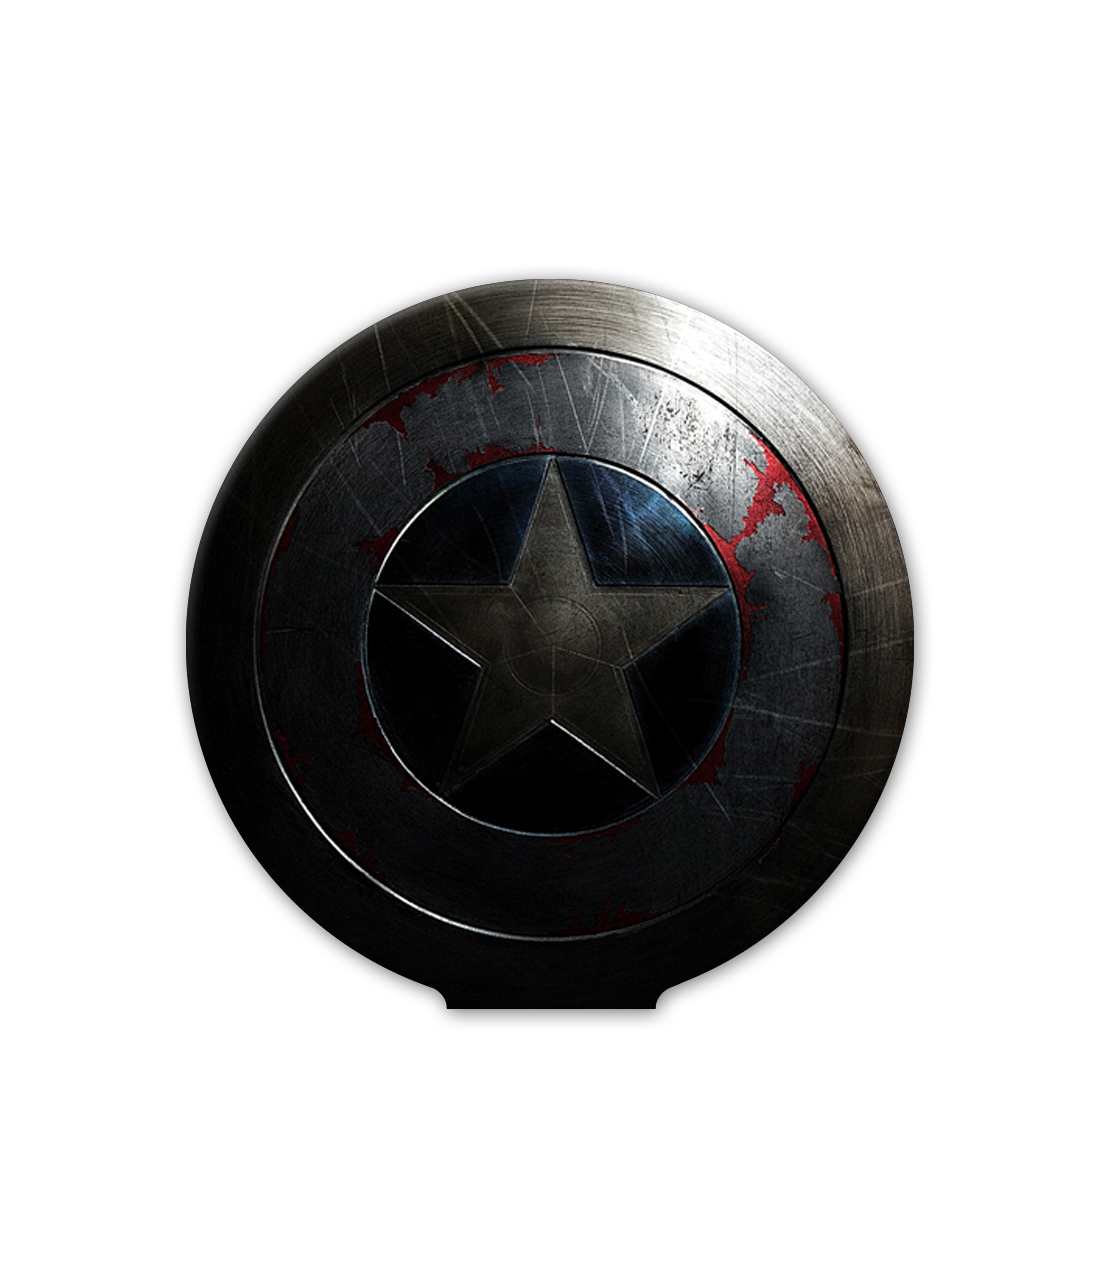 Rusted Captains Shield - Macmerise Sticky Pad